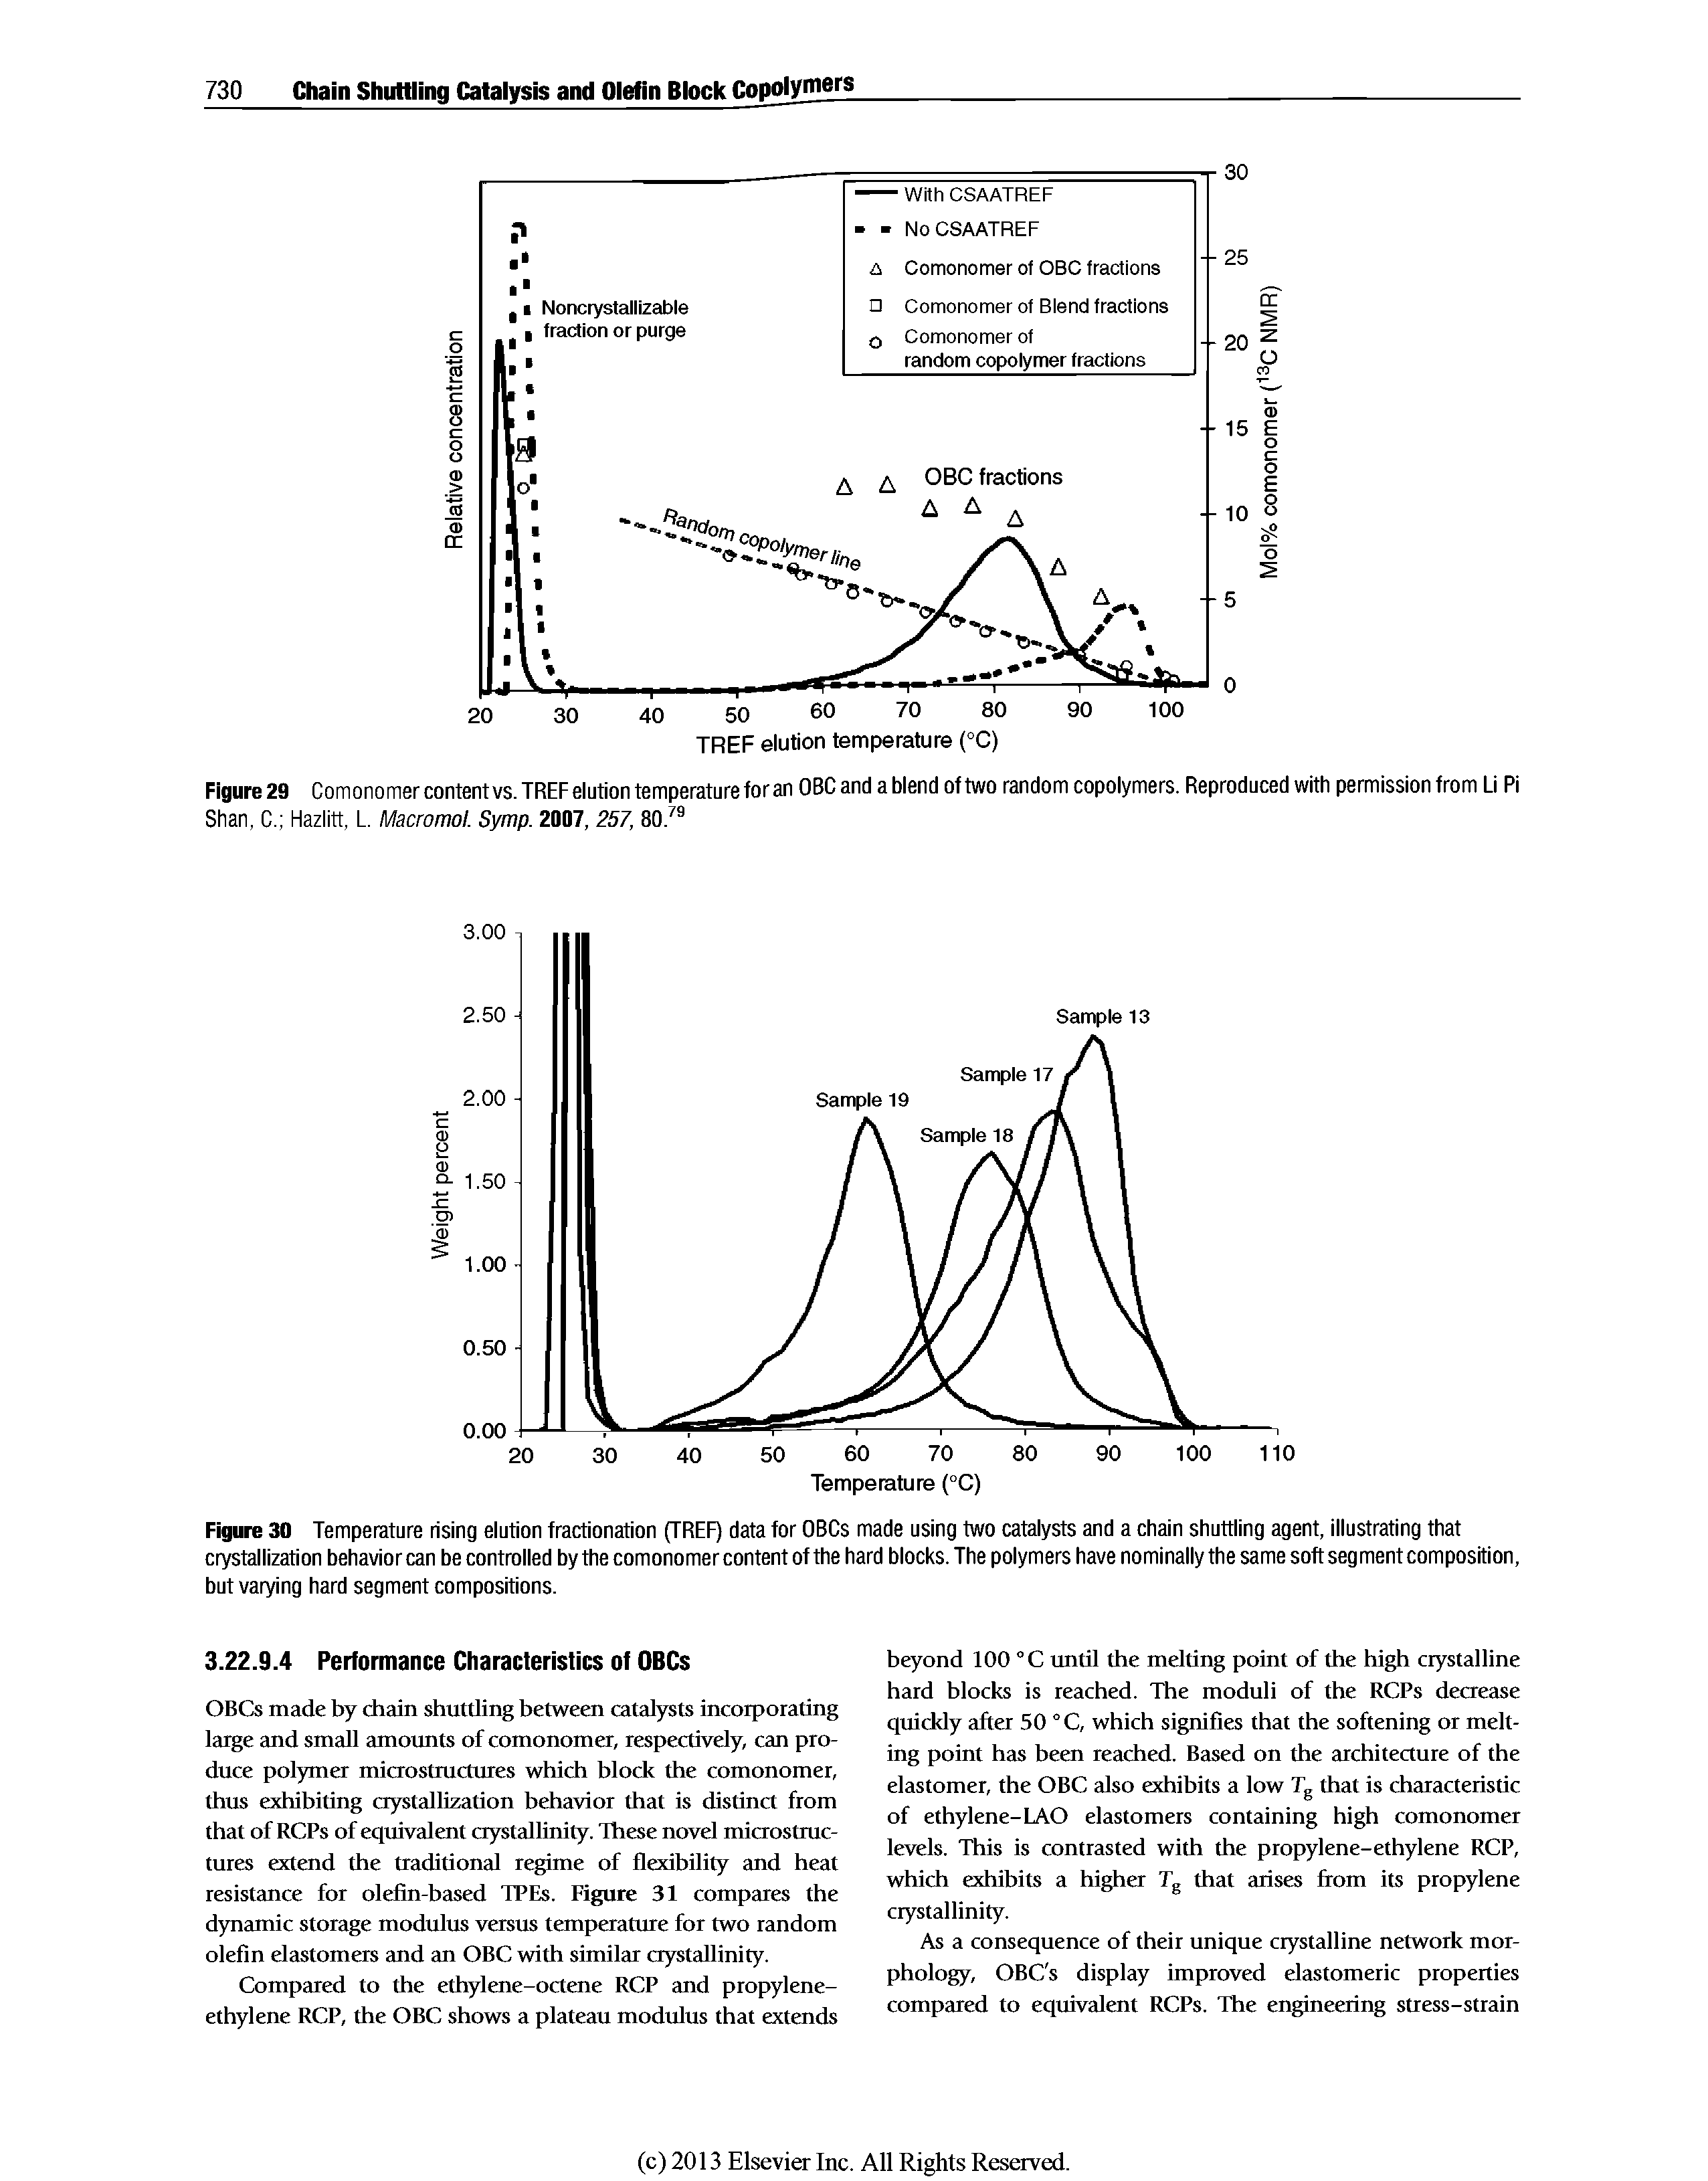 Figure 30 Temperature rising elution fractionation (TREE) data for OBCs made using two catalysts and a chain shuttling agent, illustrating that crystallization behavior can be controlled by the comonomercontent of the hard blocks. The polymers have nominally the same soft segment composition, but varying hard segment compositions.